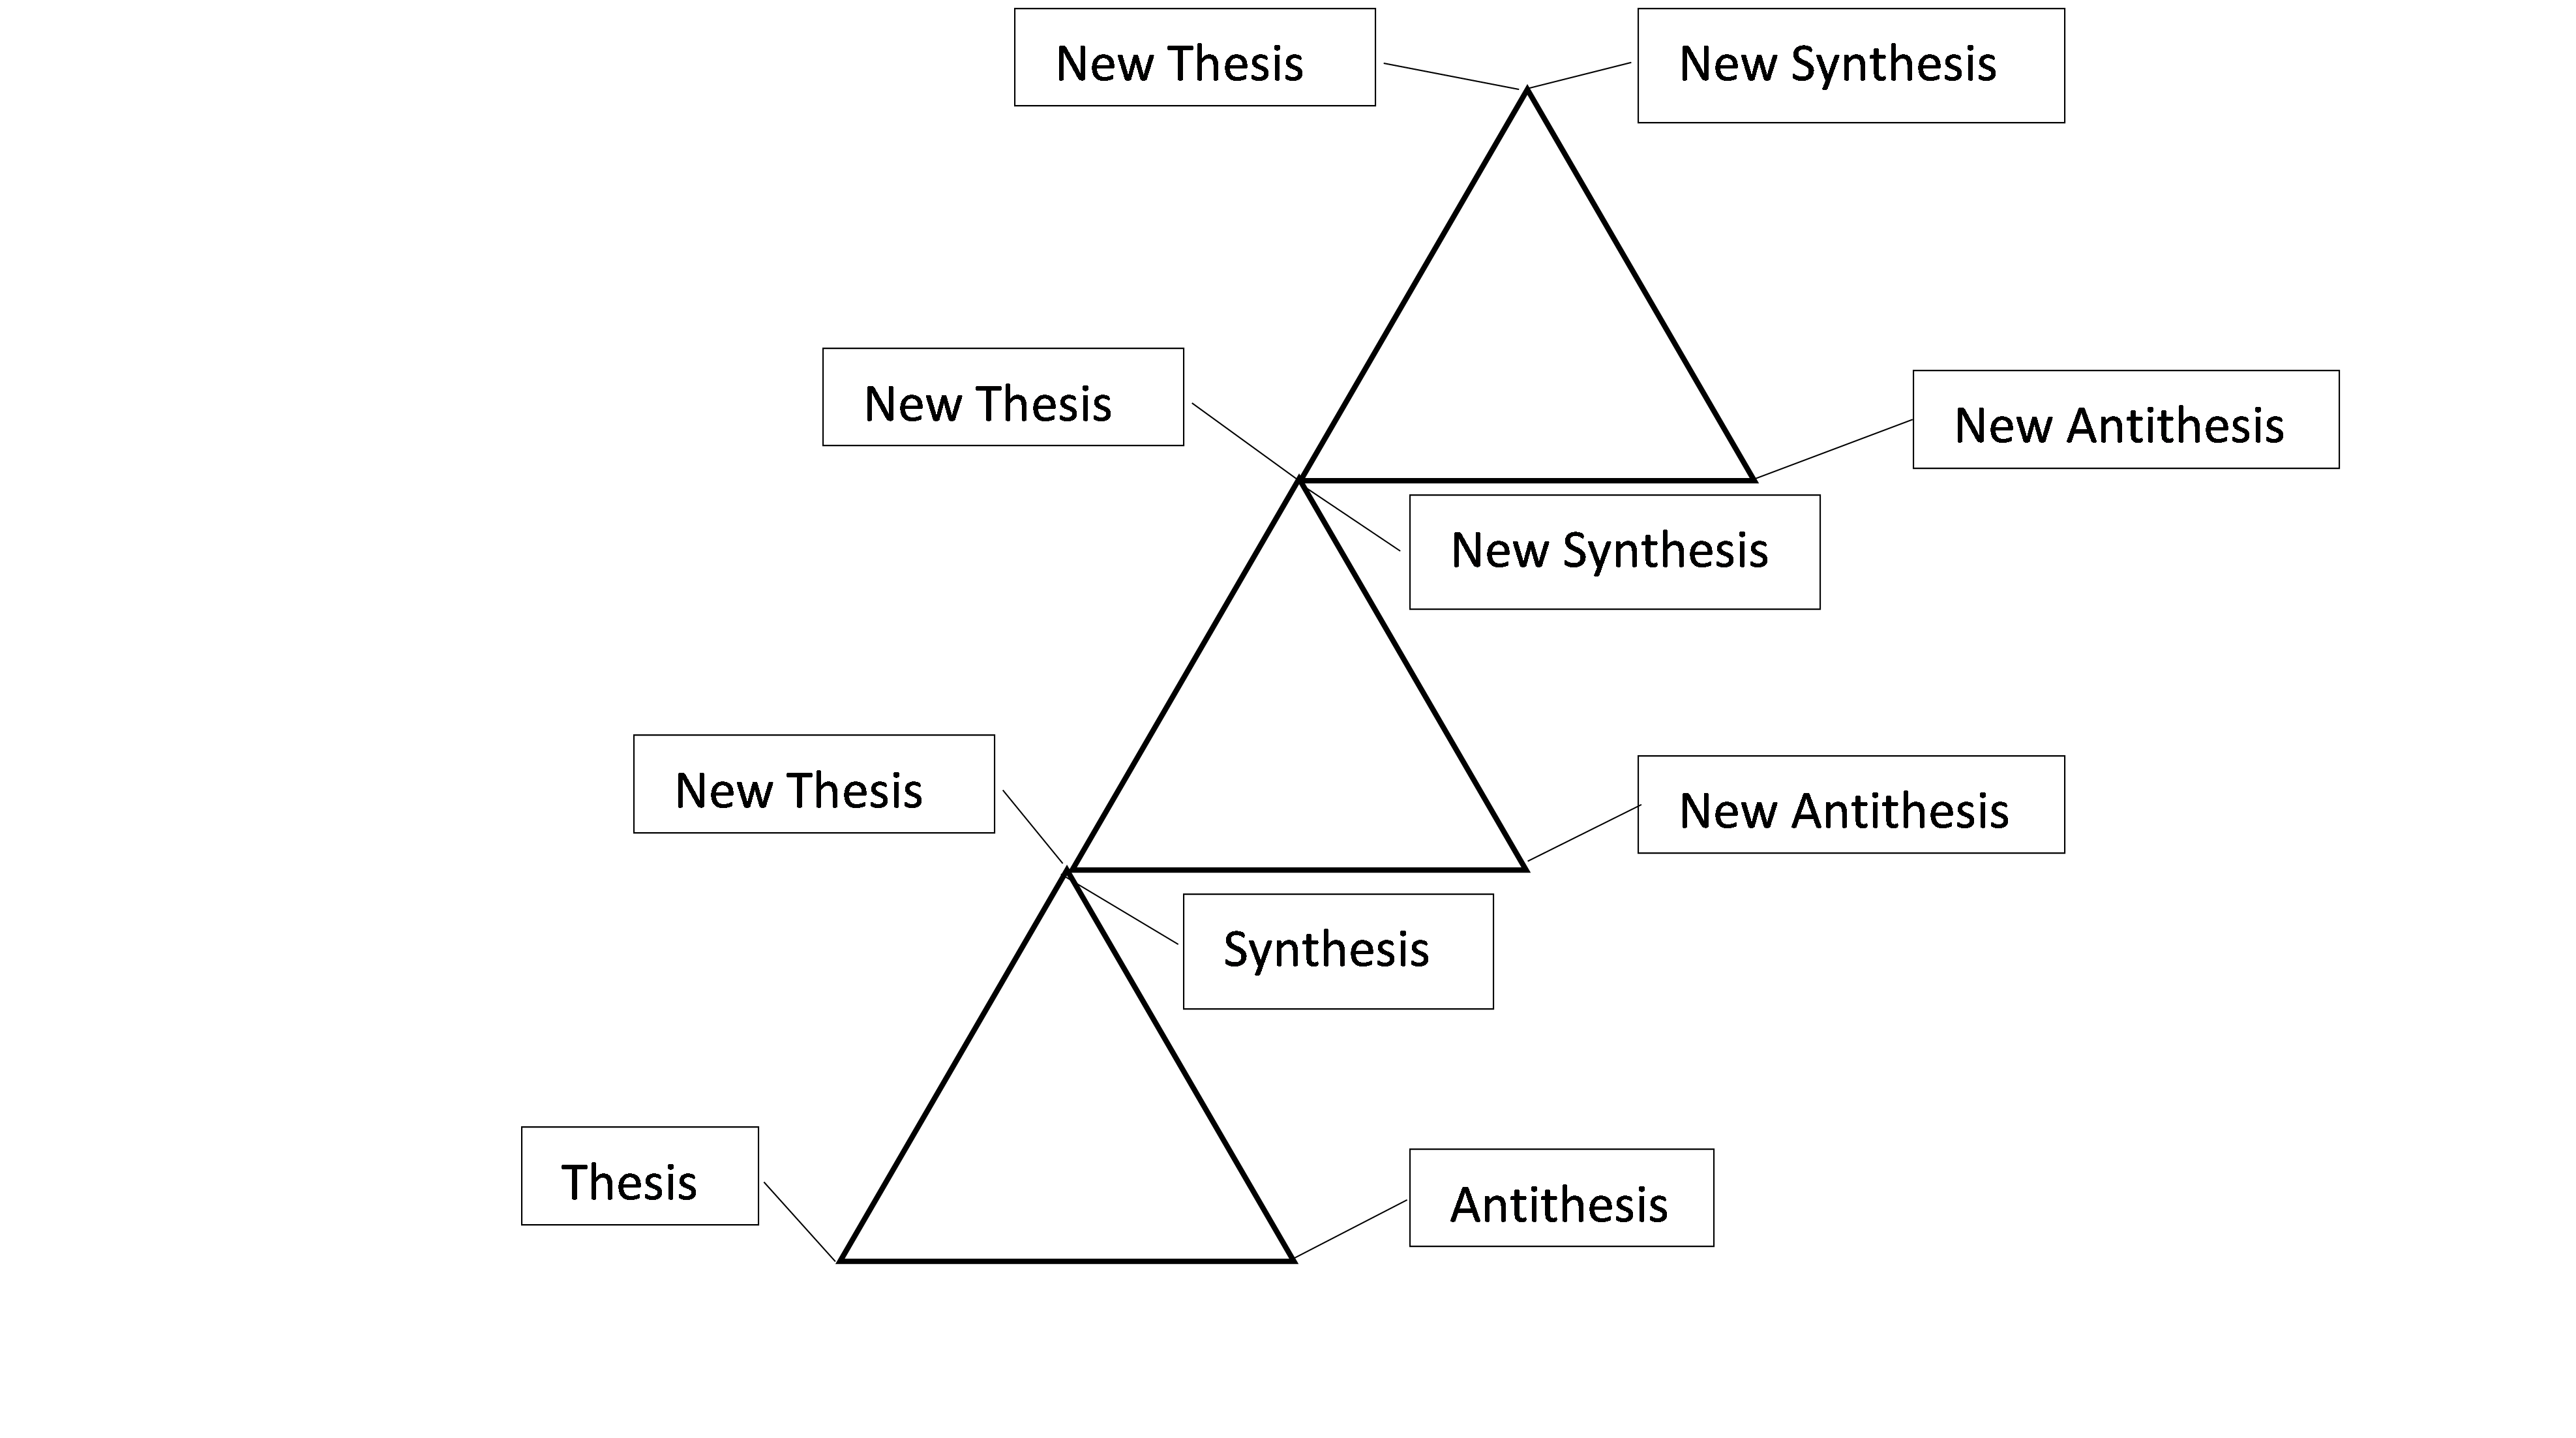 dialectic thesis antithesis synthesis codycross